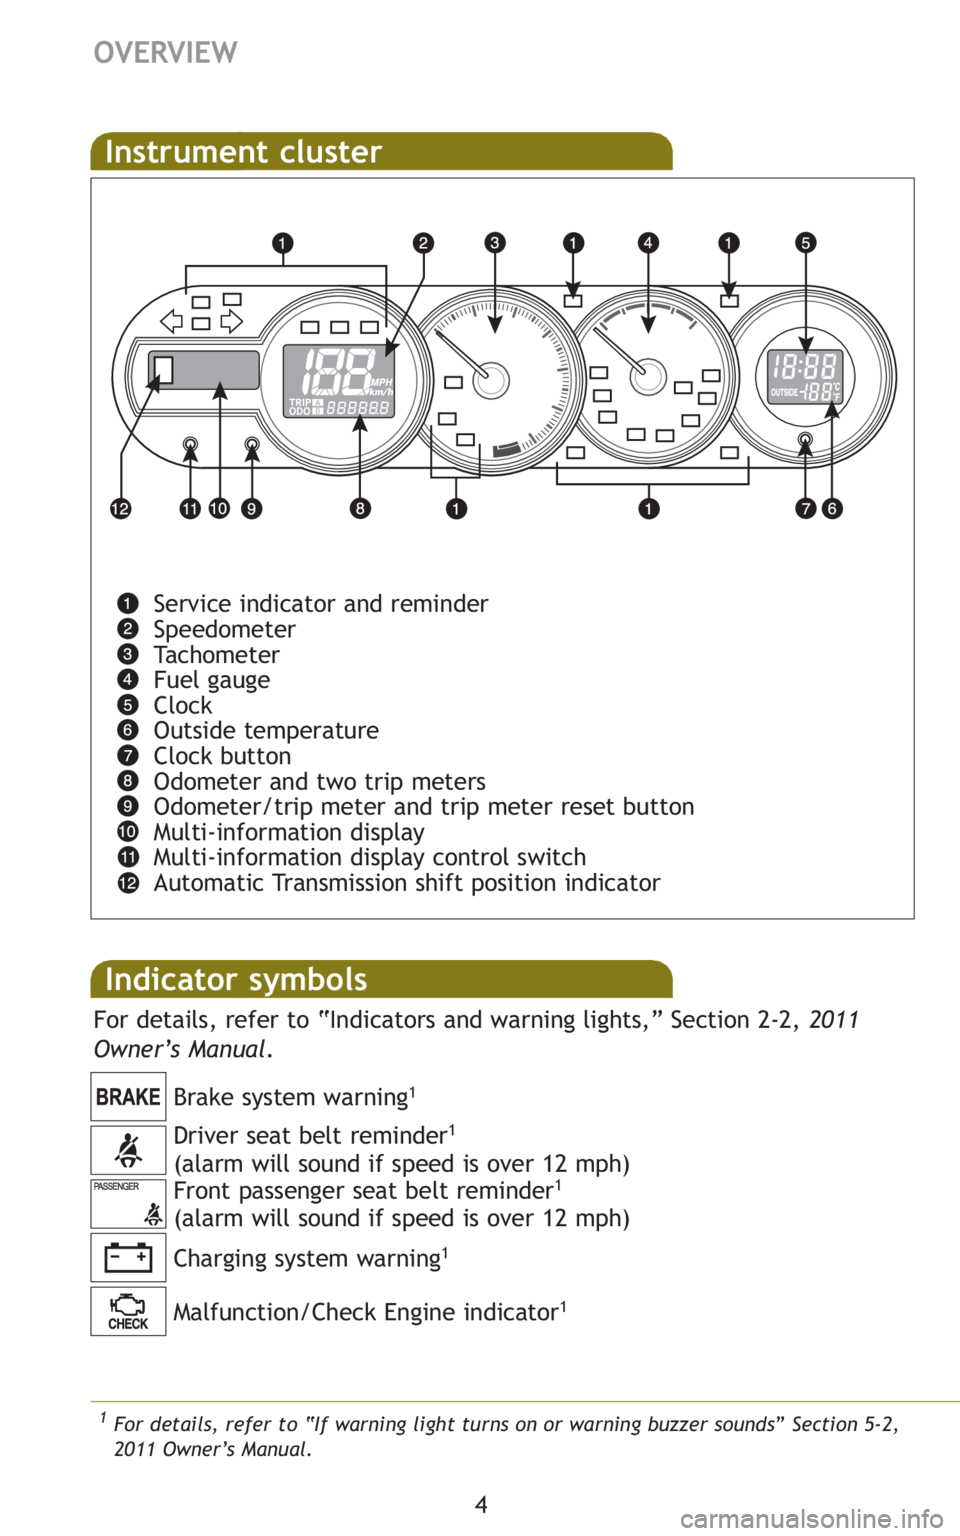 TOYOTA xB 2011  Owners Manual (in English) 4
OVERVIEW
Driver seat belt reminder1
(alarm will sound if speed is over 12 mph)
Front passenger seat belt reminder1 
(alarm will sound if speed is over 12 mph) Brake system warning
1
Charging system 